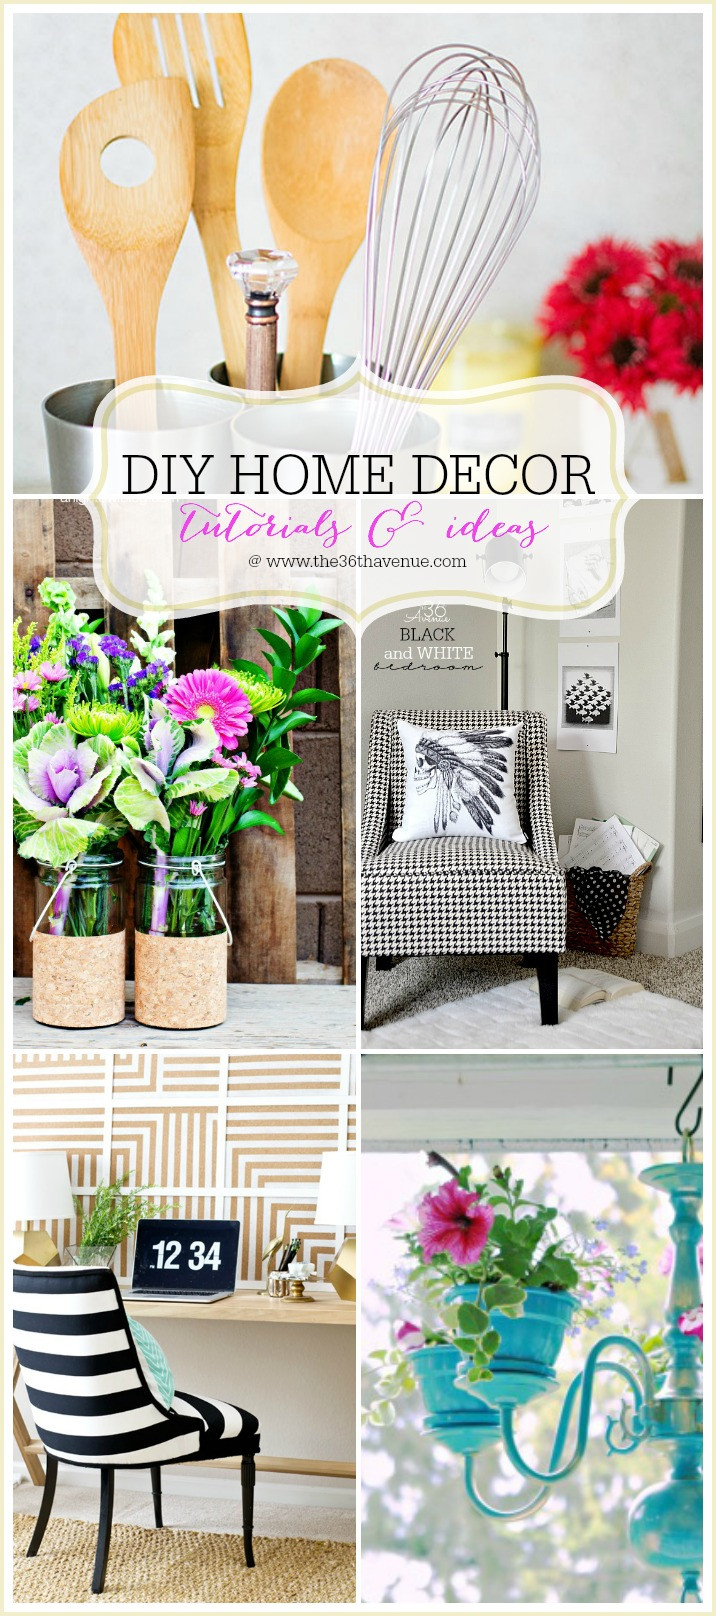 DIY Project Ideas For Homes
 The 36th AVENUE Home Decor DIY Projects